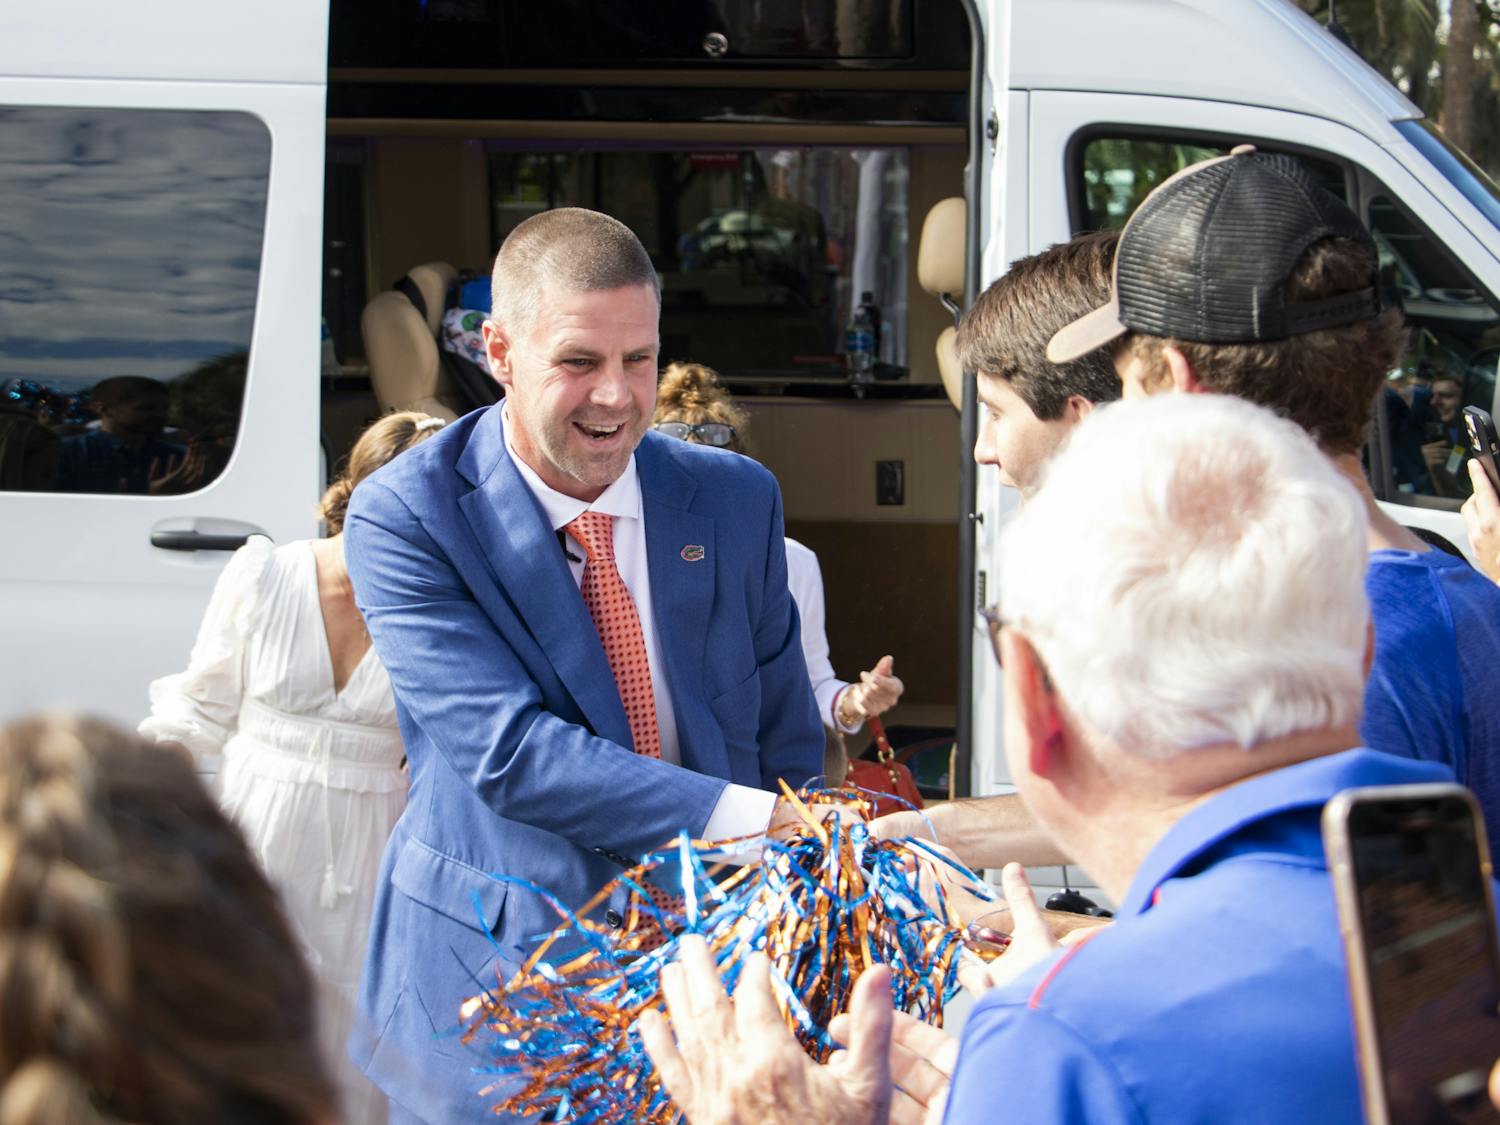 Florida football coach Billy Napier greets fans during his first day on the job Dec. 5, 2021 in Gainesville.